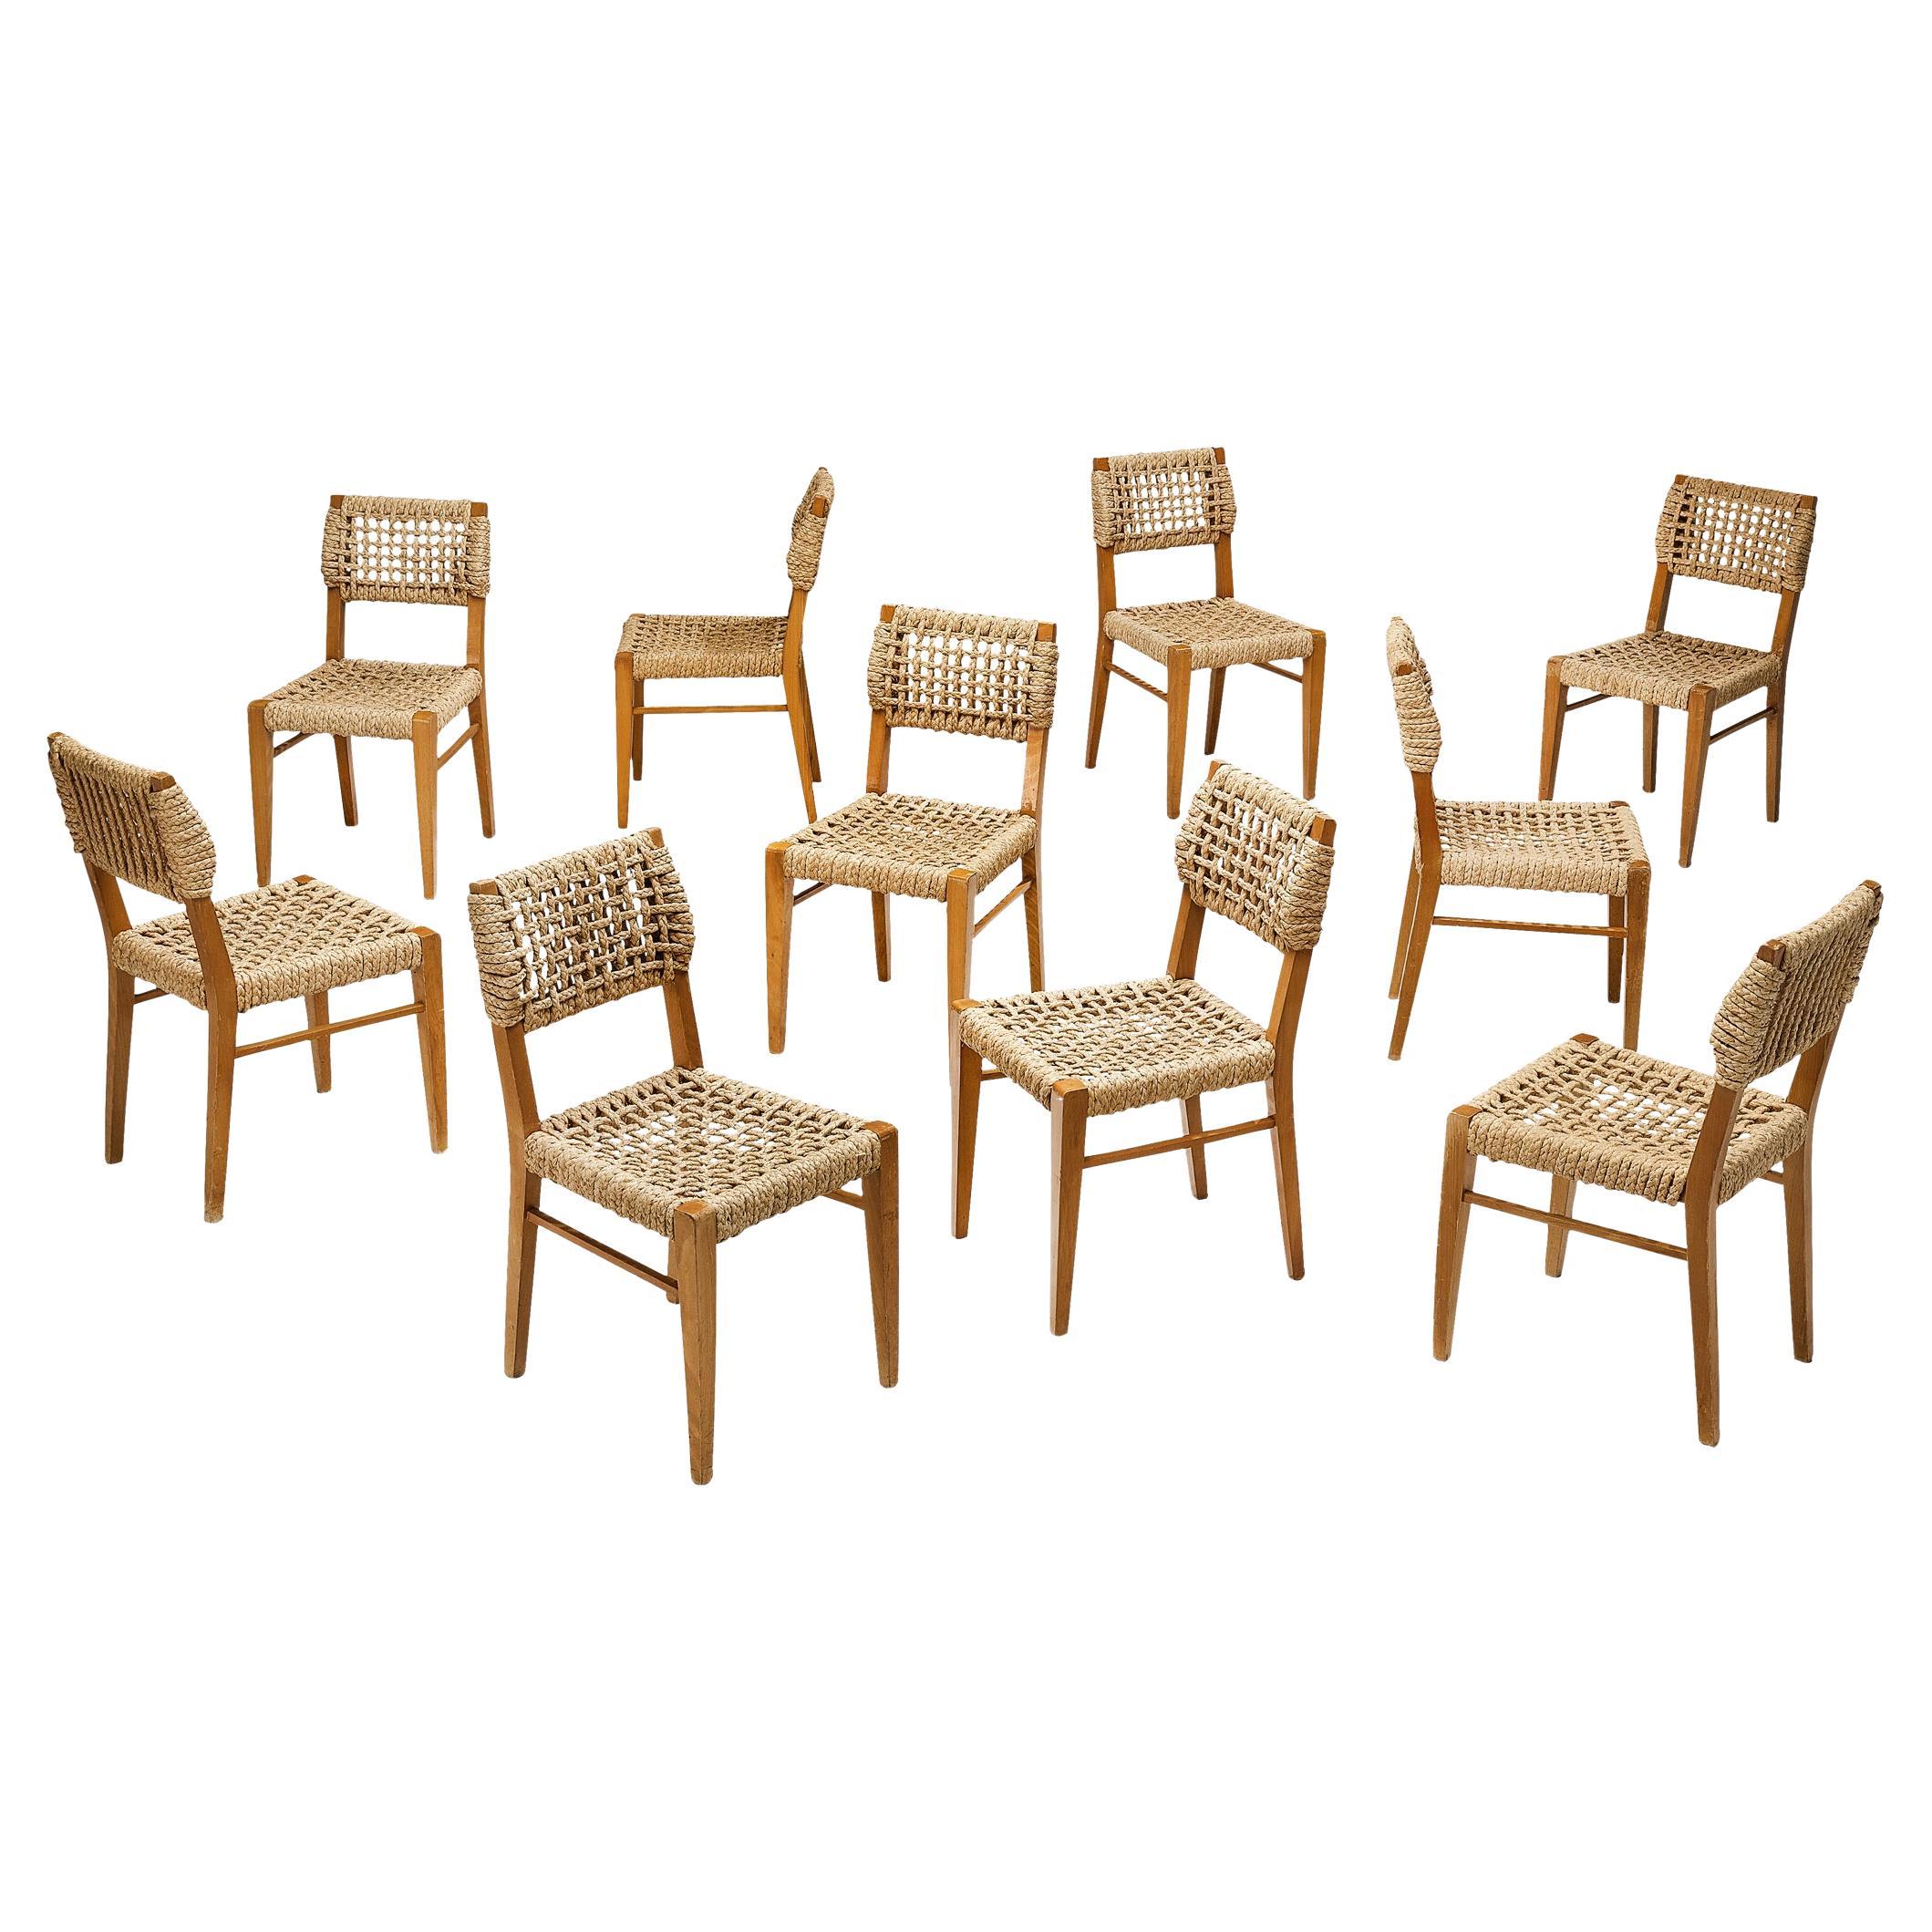 Adrien Audoux and Frida Minet Set of Ten Dining Chairs with Rope Seating